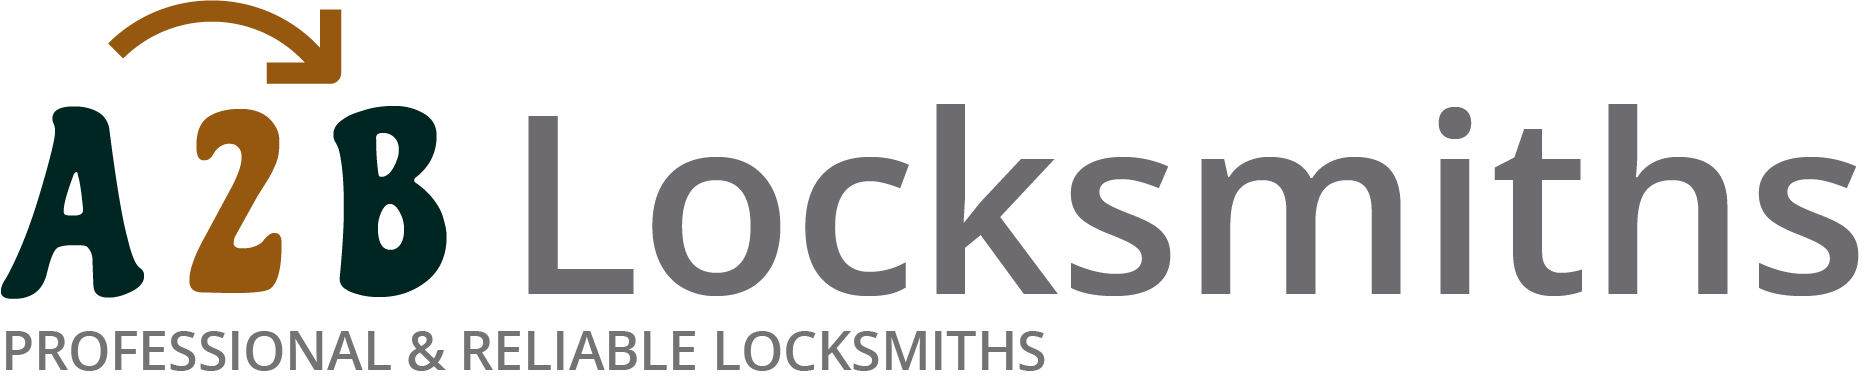 If you are locked out of house in Tottington, our 24/7 local emergency locksmith services can help you.